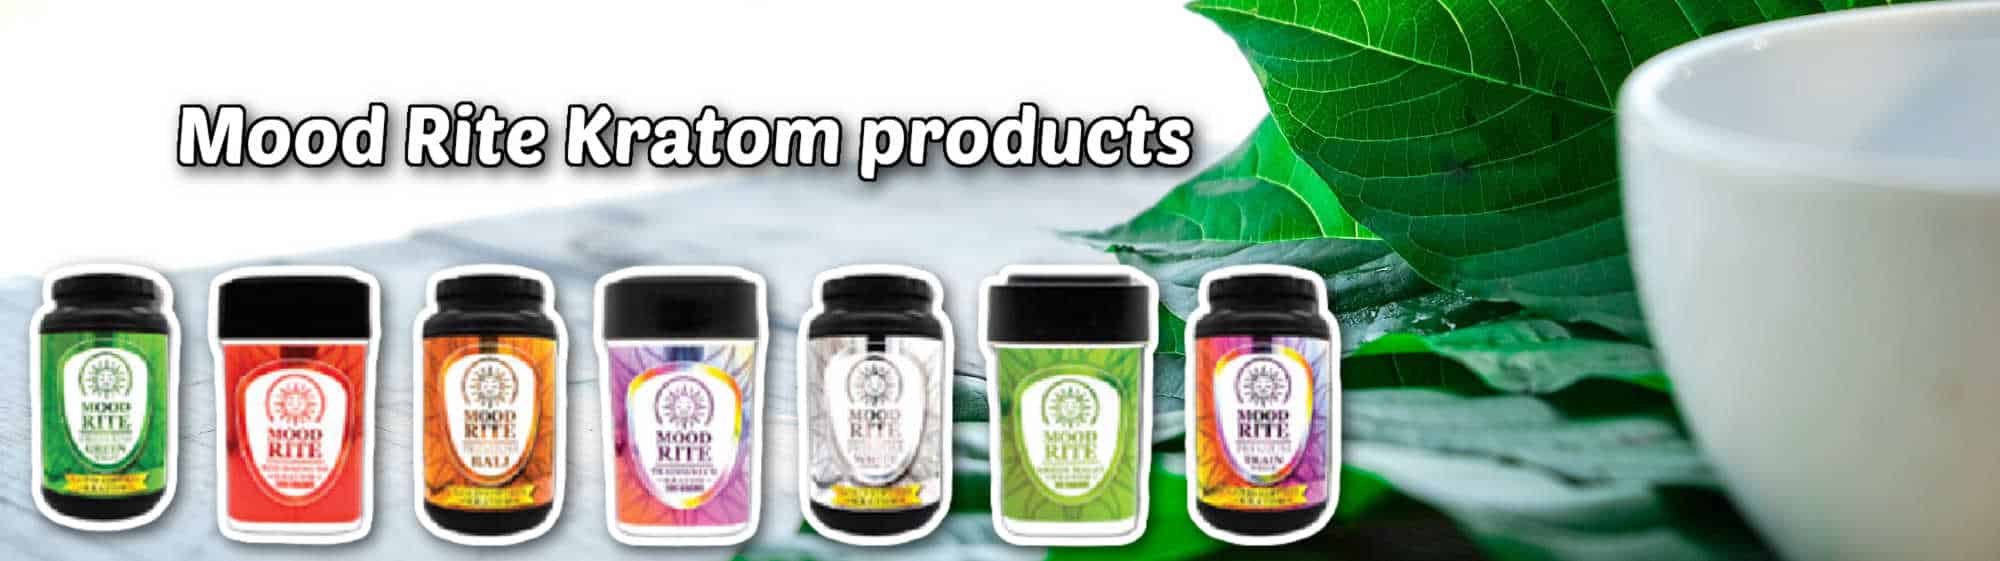 image of mood rite kratom products